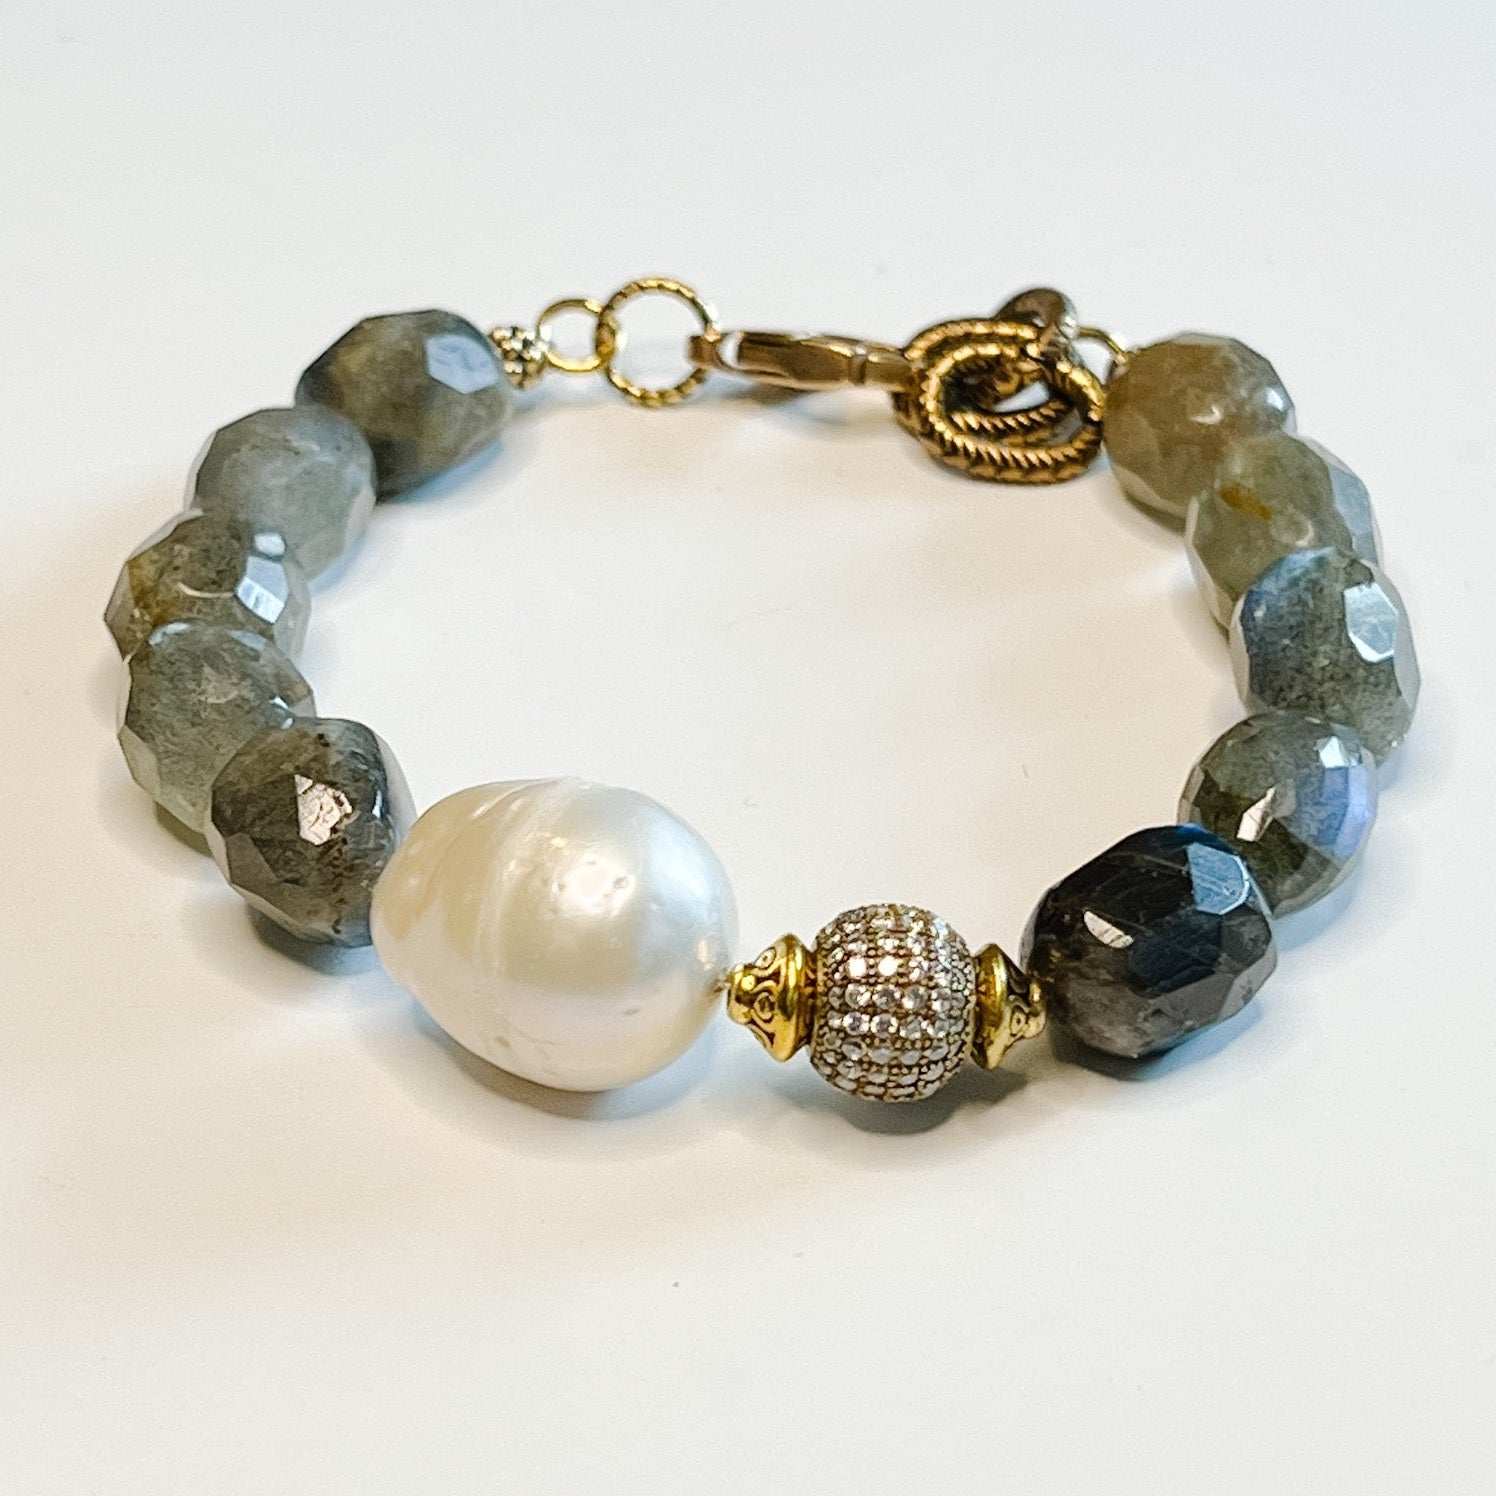 Bracelet, Ida - Danshire Market and Design, beaded bracelet, gold accents, gray beads, pearl stone and an embellished ball.